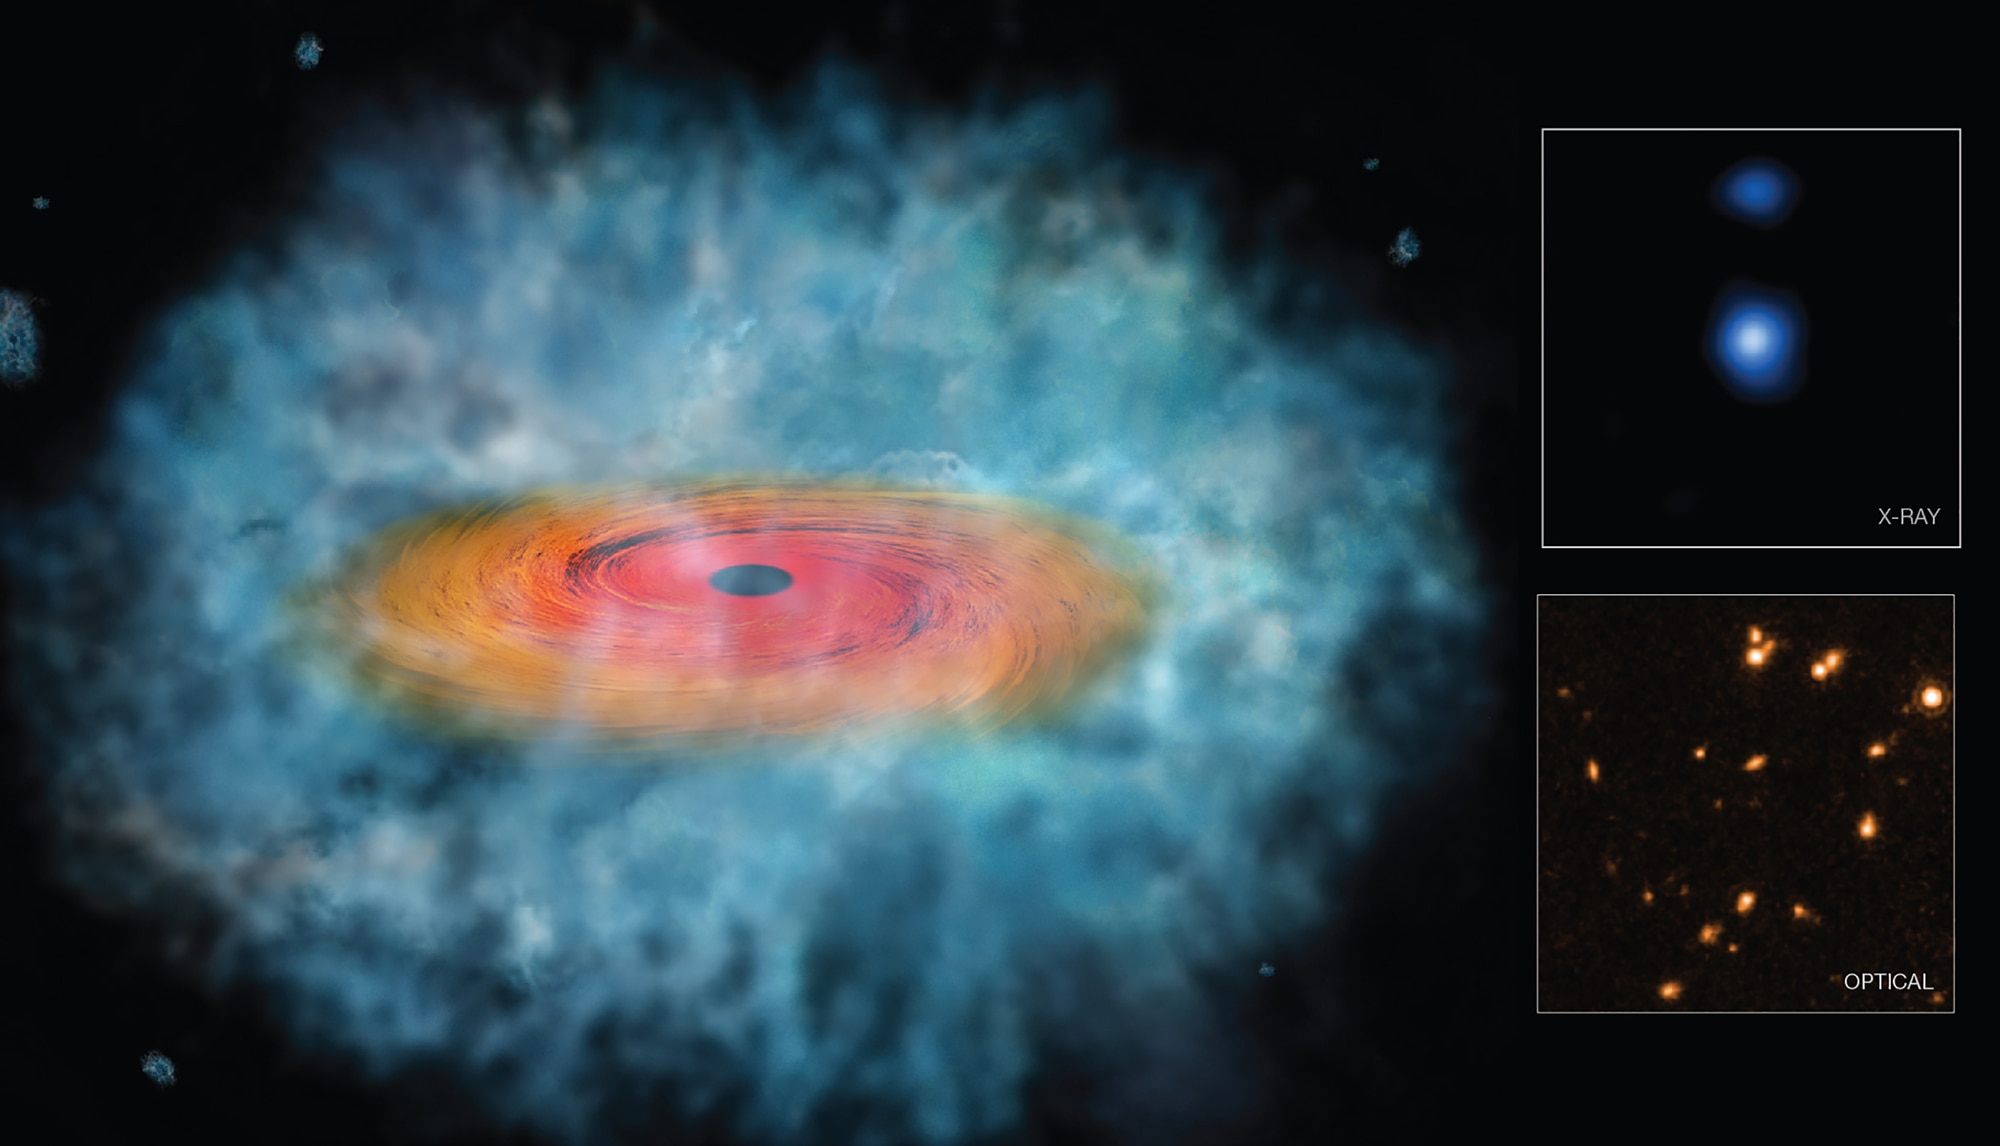 One of the two bouncing baby supermassive black holes found in a survey (right), along with an illustration of what they might look like up close (left).